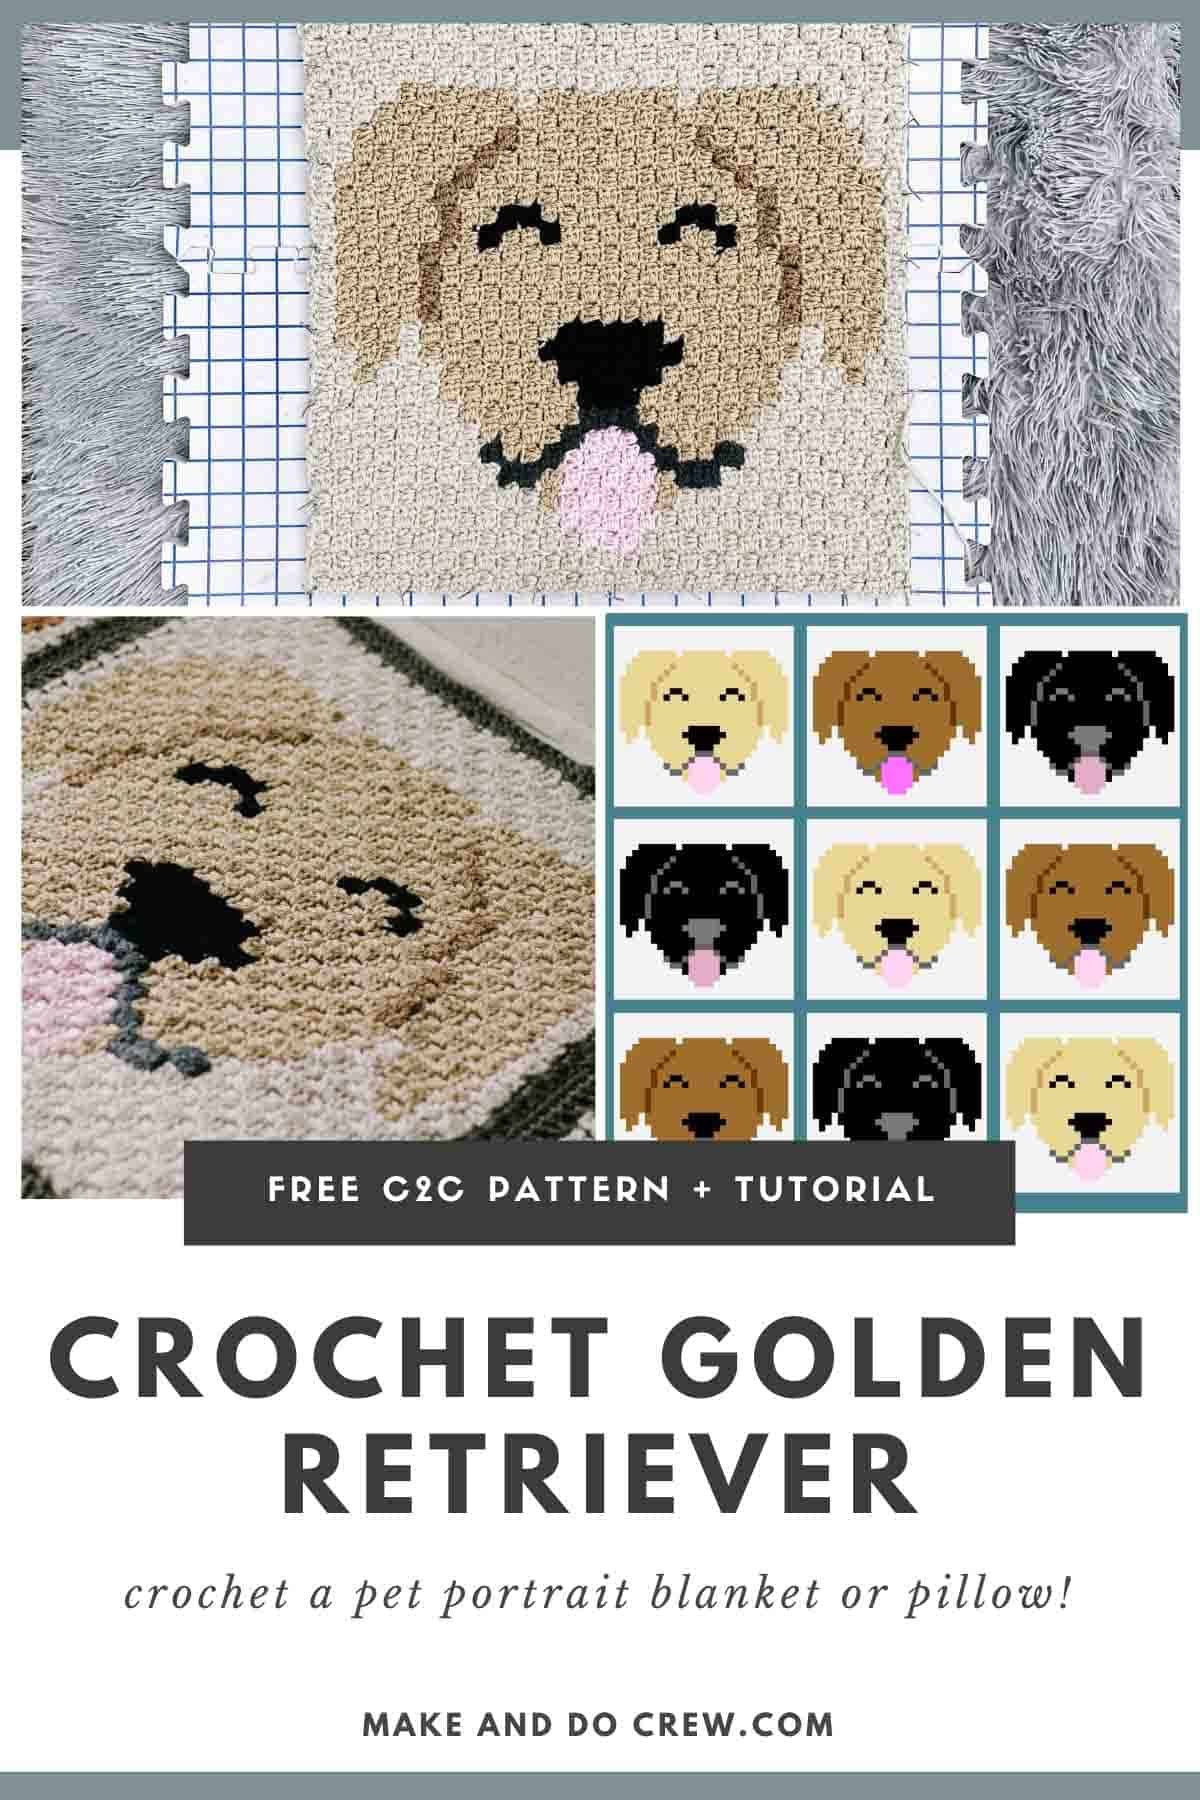 This image shows a free crochet pattern for a golden retriever corner to corner crochet blanket.